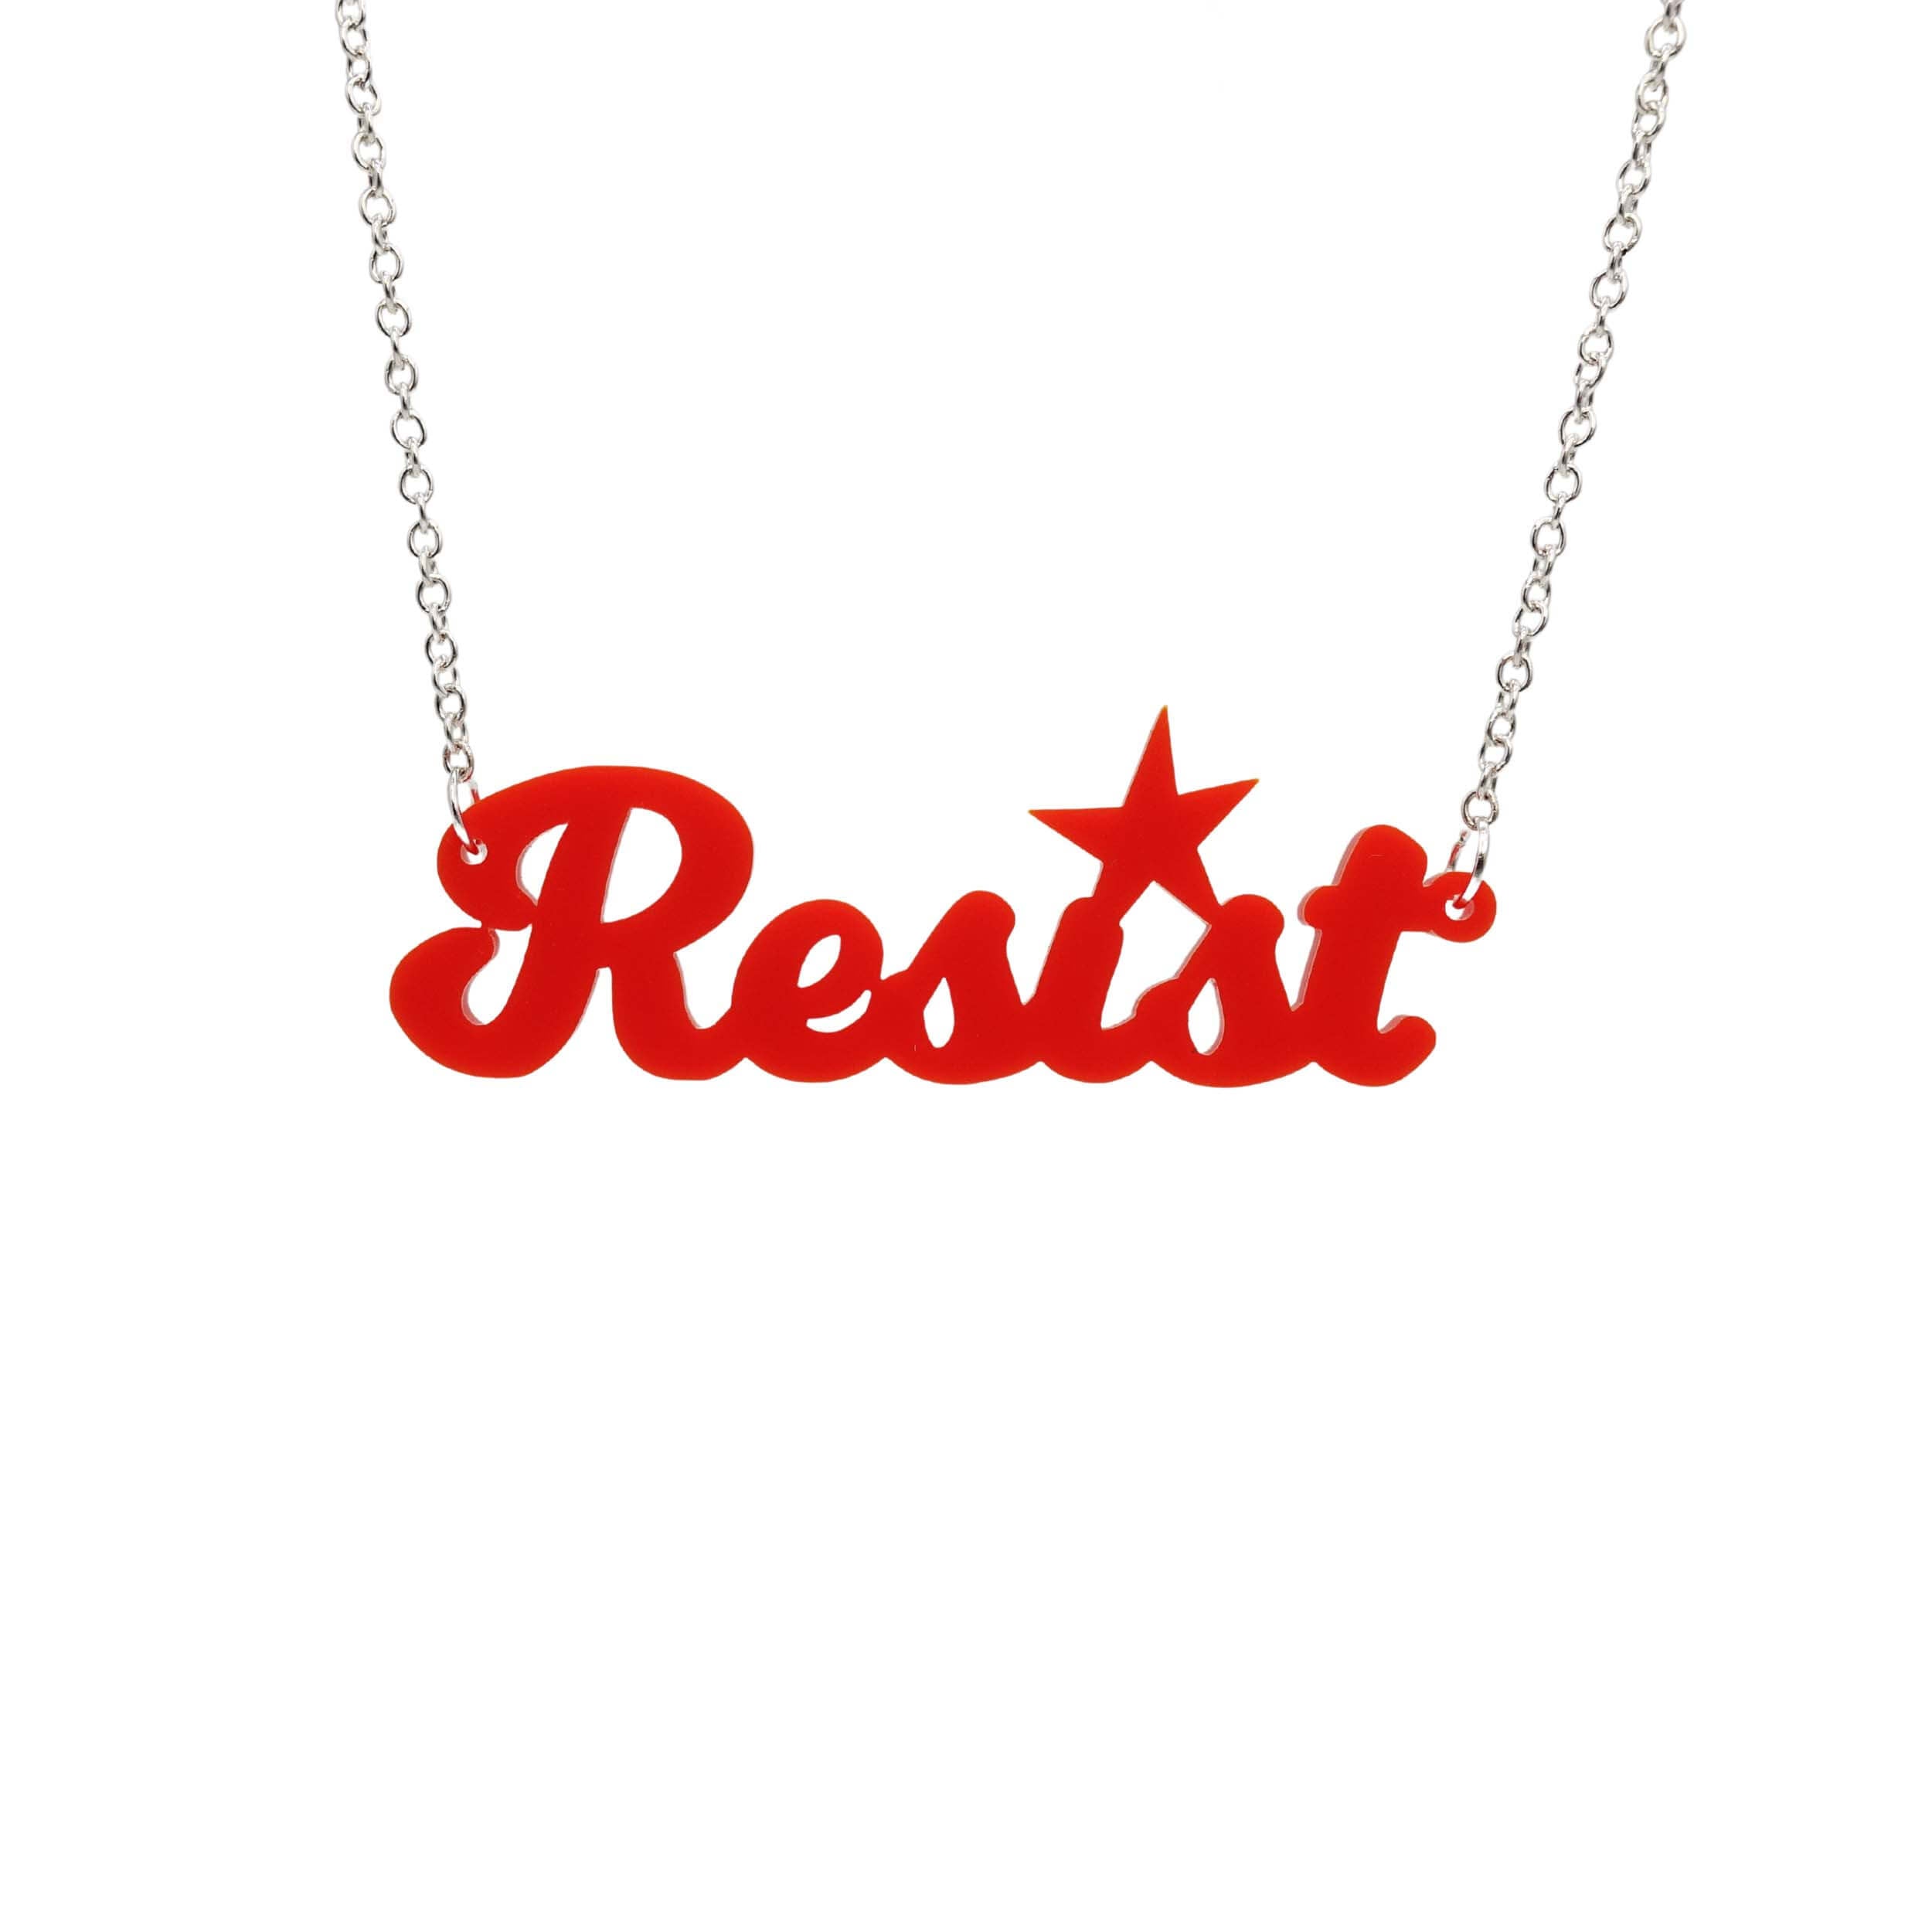 Matte red script Resist necklace shown hanging against a white background. 